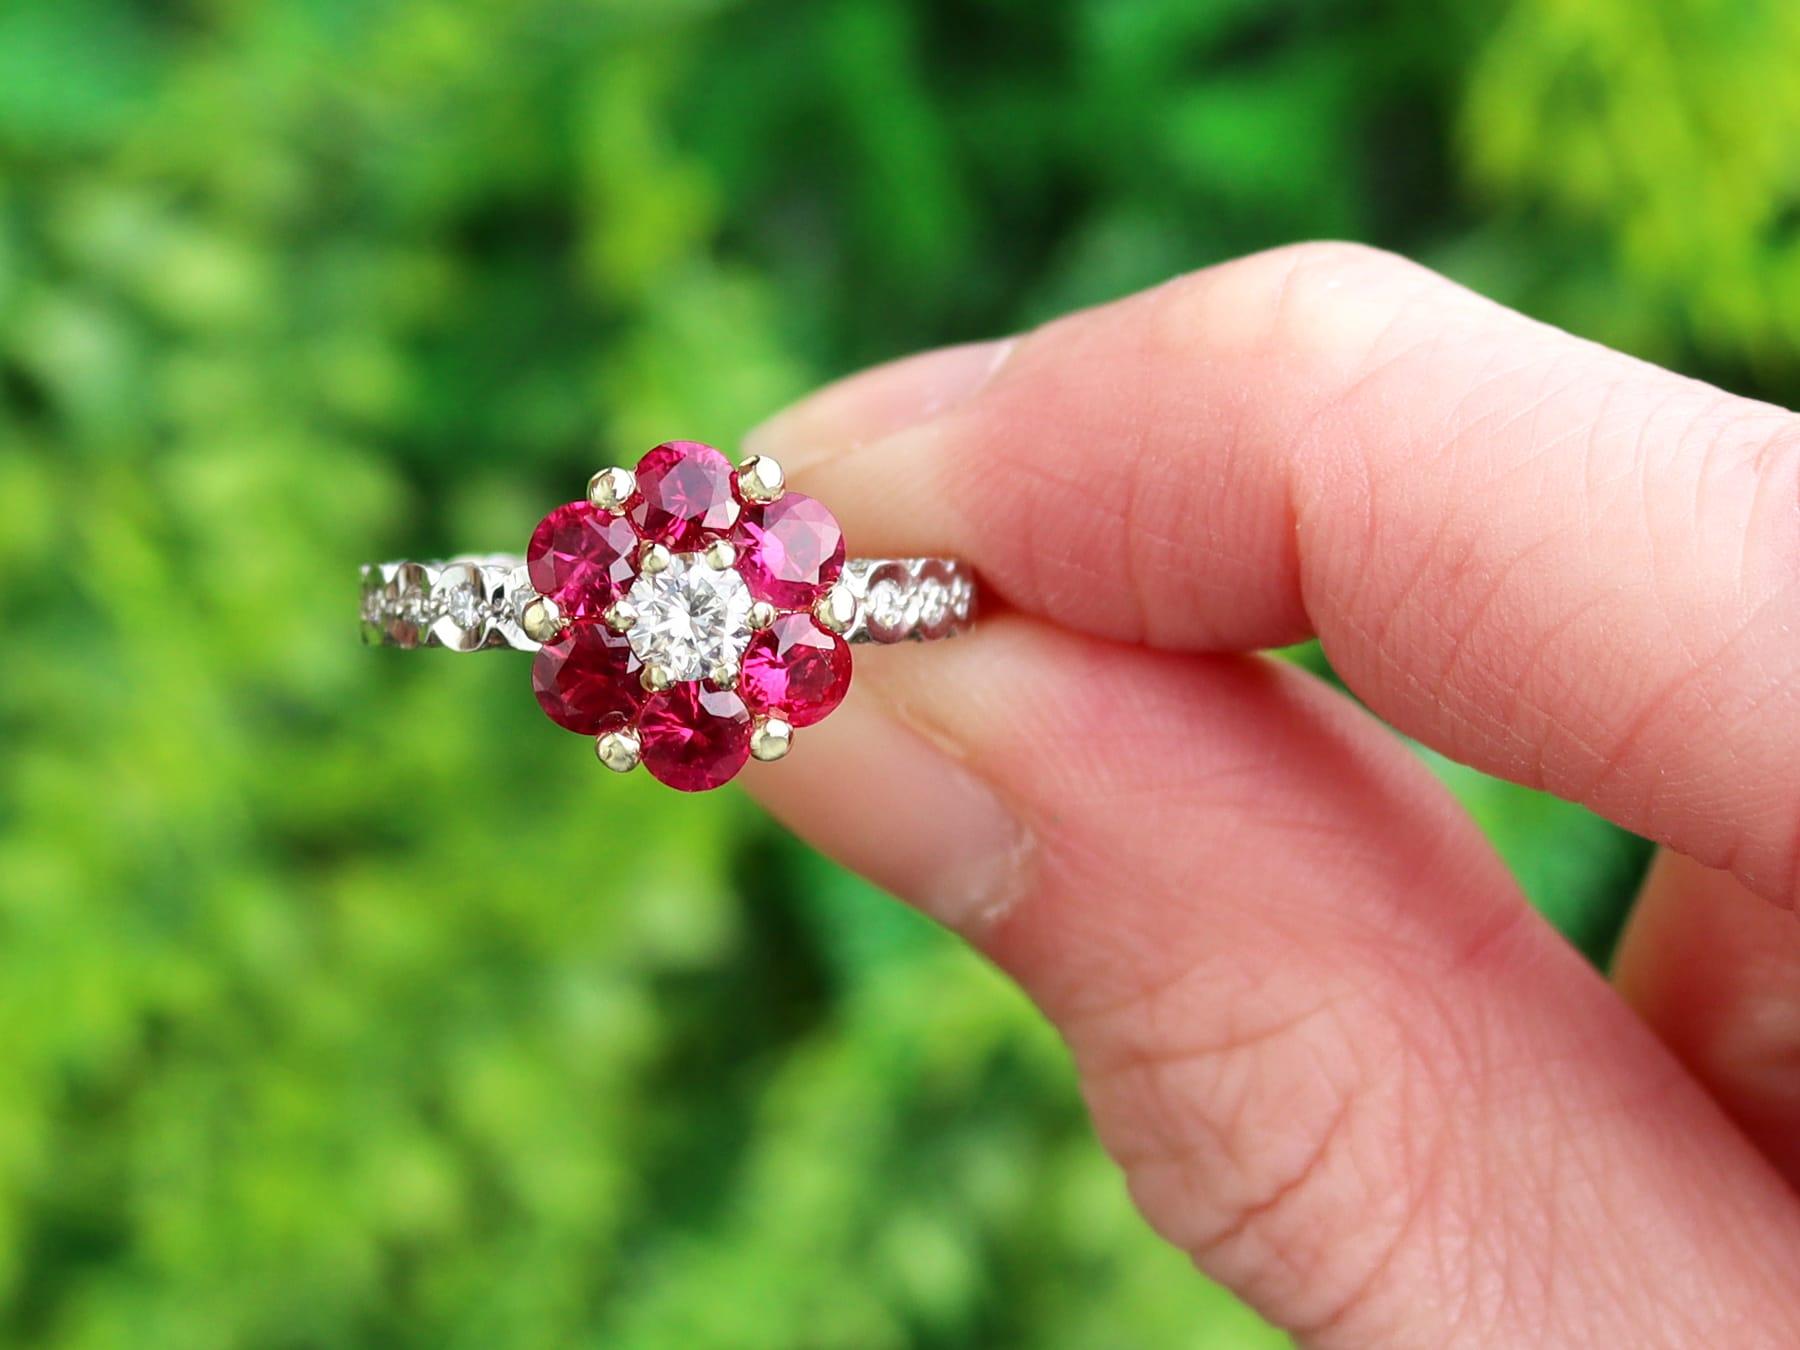 A fine and impressive vintage 1.46 carat ruby and 1.88 carat diamond, 18 karat white gold and 18k yellow gold set cluster ring; part of our diverse collection of vintage jewelry.

This fine and impressive vintage ring has been crafted in 18k white